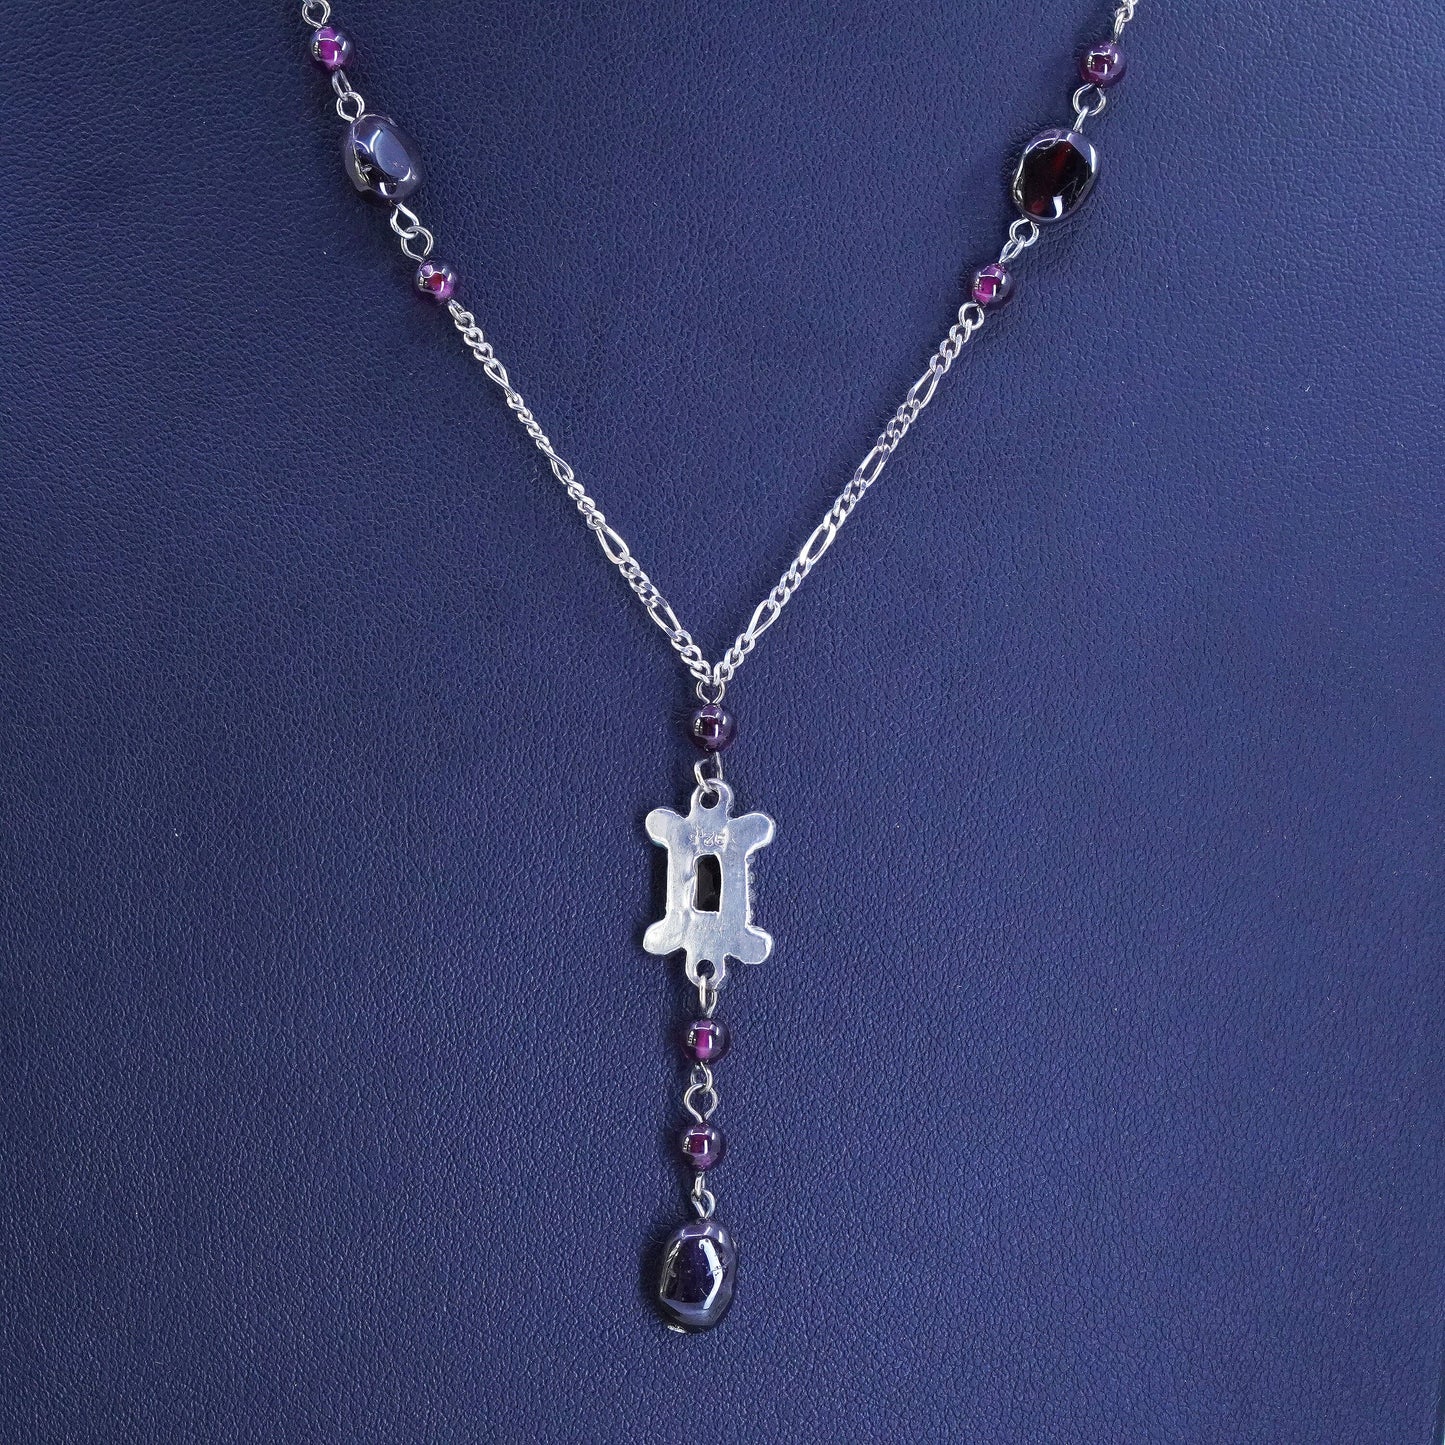 17", Sterling silver necklace, Italy 925 figaro chain with garnet pendant